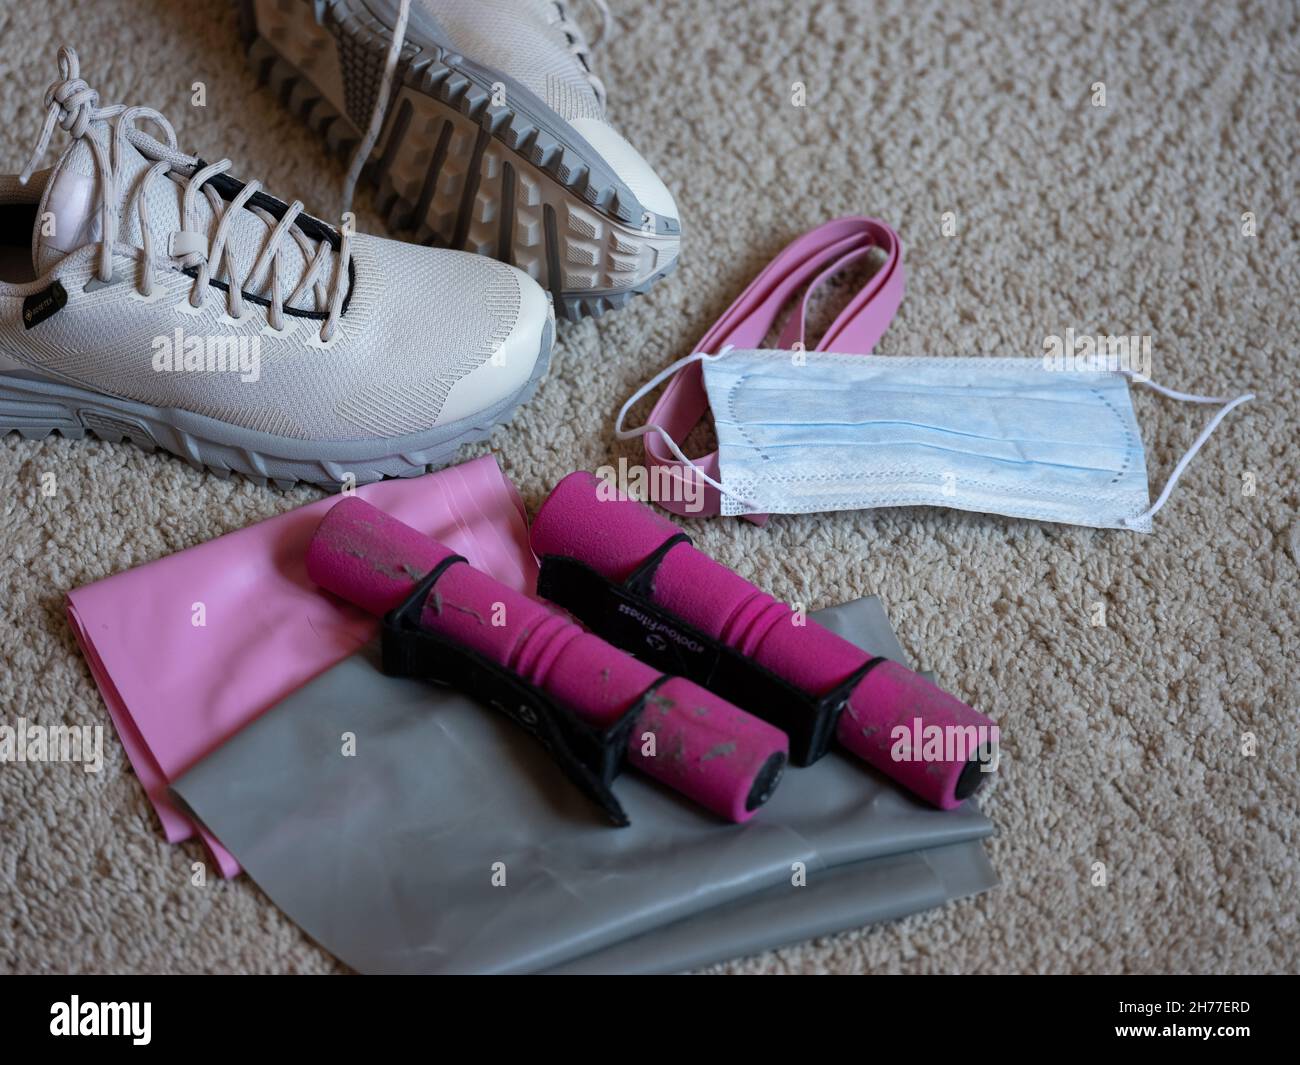 Sports Utensils and Shoes with Corona Mask on the floor Stock Photo